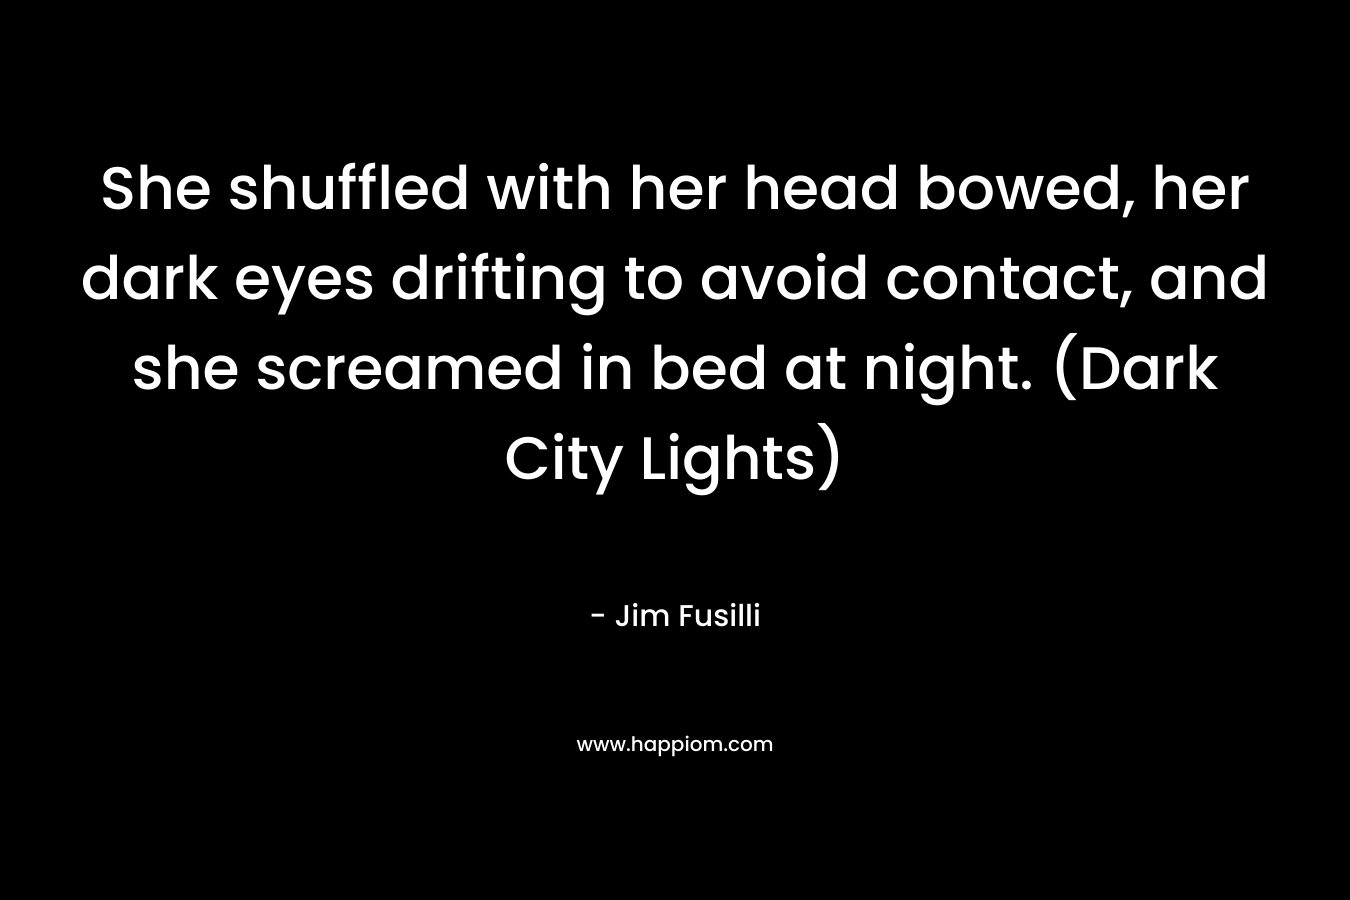 She shuffled with her head bowed, her dark eyes drifting to avoid contact, and she screamed in bed at night. (Dark City Lights)